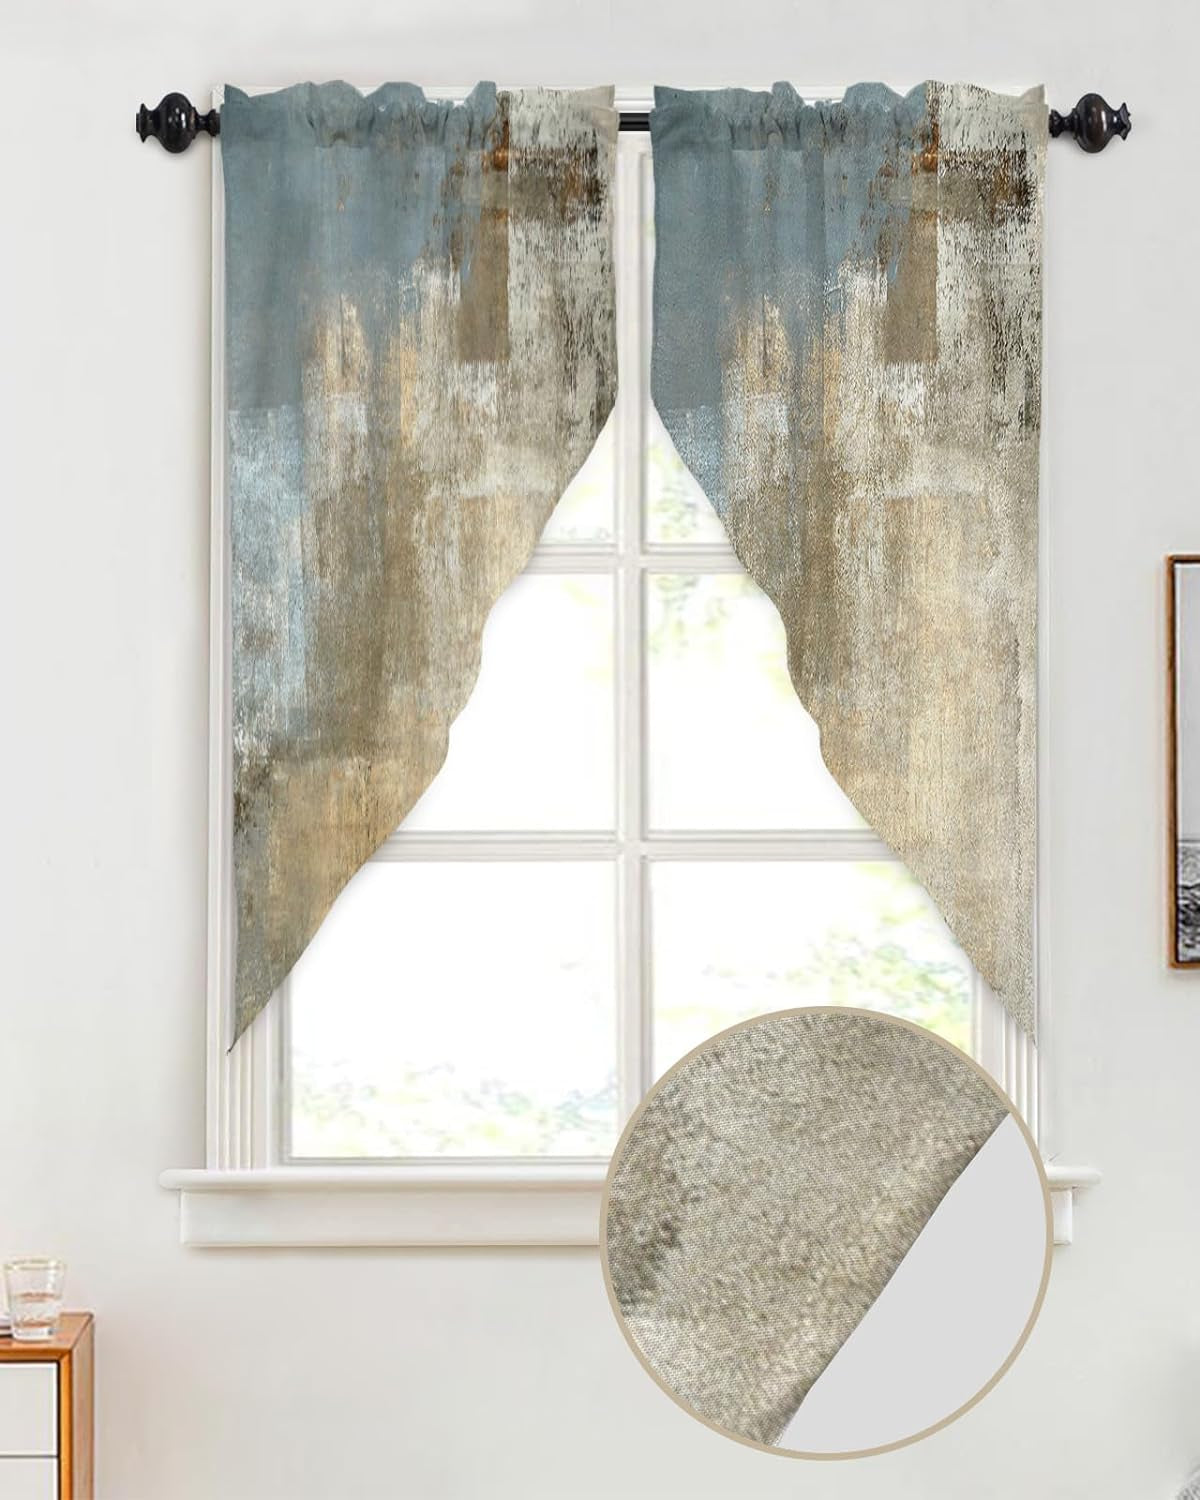 Abstract Swag Valance Curtains Retro Rustic Country Style Farmhouse Art Oil Painting Rod Pocket Kitchen Curtains Scalloped Window Treatment Valances Swag Curtains for Living Room, 1 Pair, 36"W X 36"L